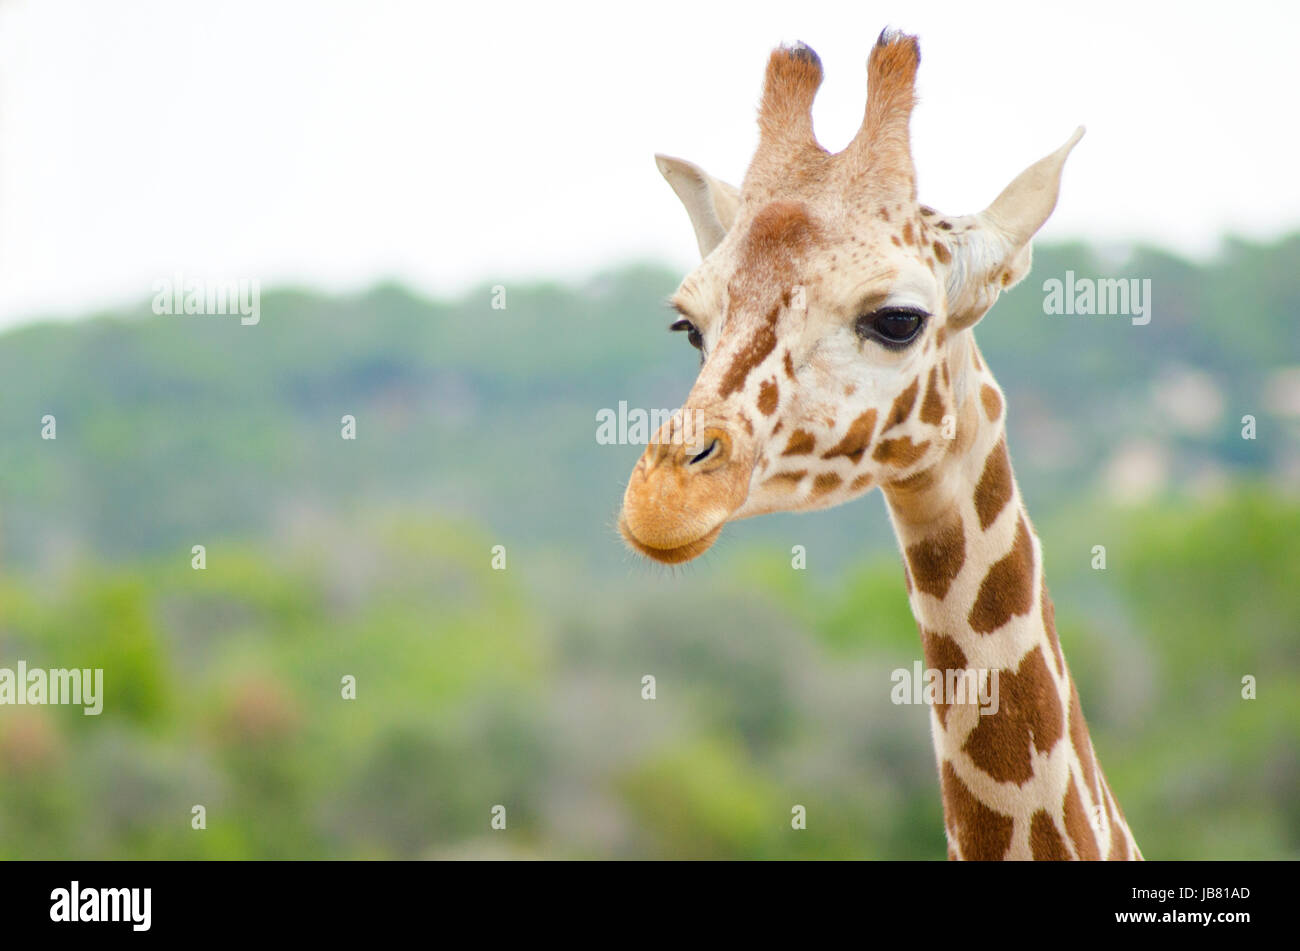 A close up view of a baby giraffe calf. The Giraffa camelopardalis is the tallest living terrestrial animal and the largest ruminant, with extremely long neck and legs, horn-like ossicones and distinctive coat patterns Stock Photo